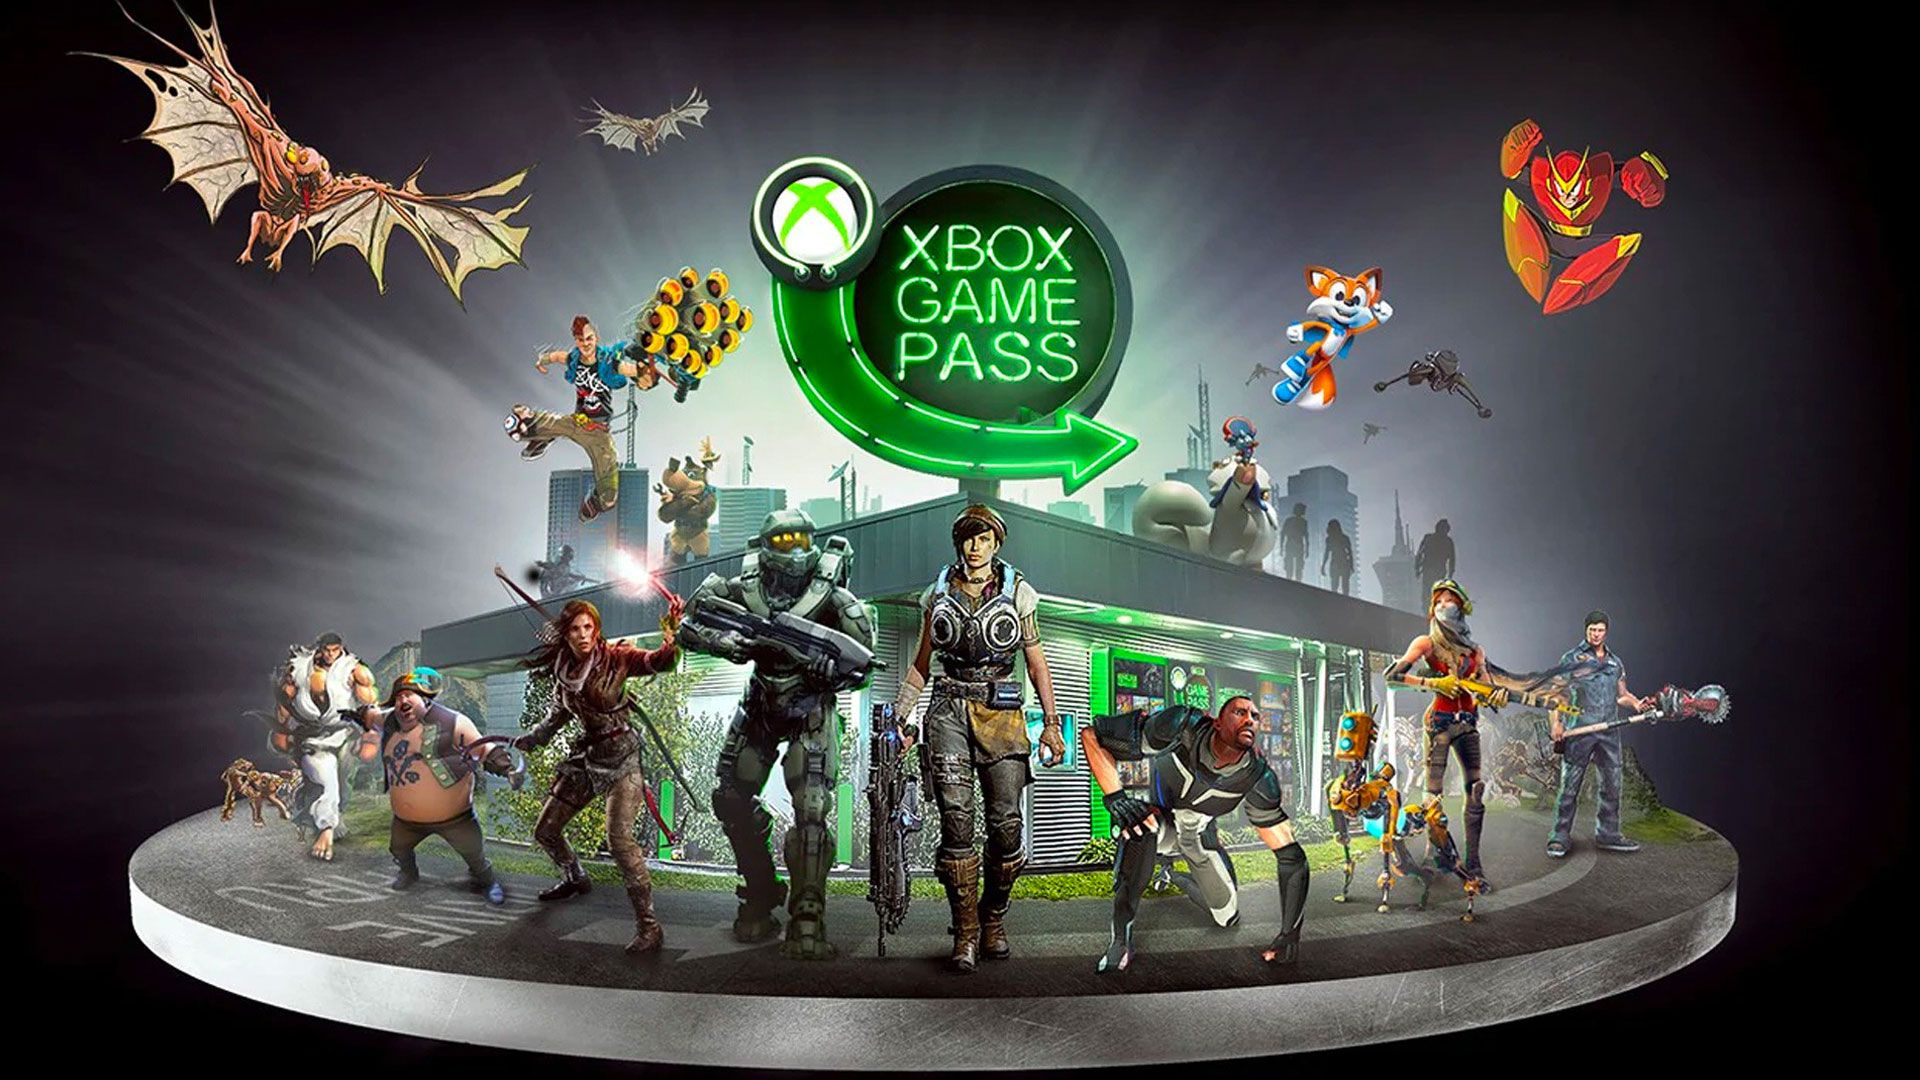 Xbox Game Pass age restriction bug: How to fix it in 2022?